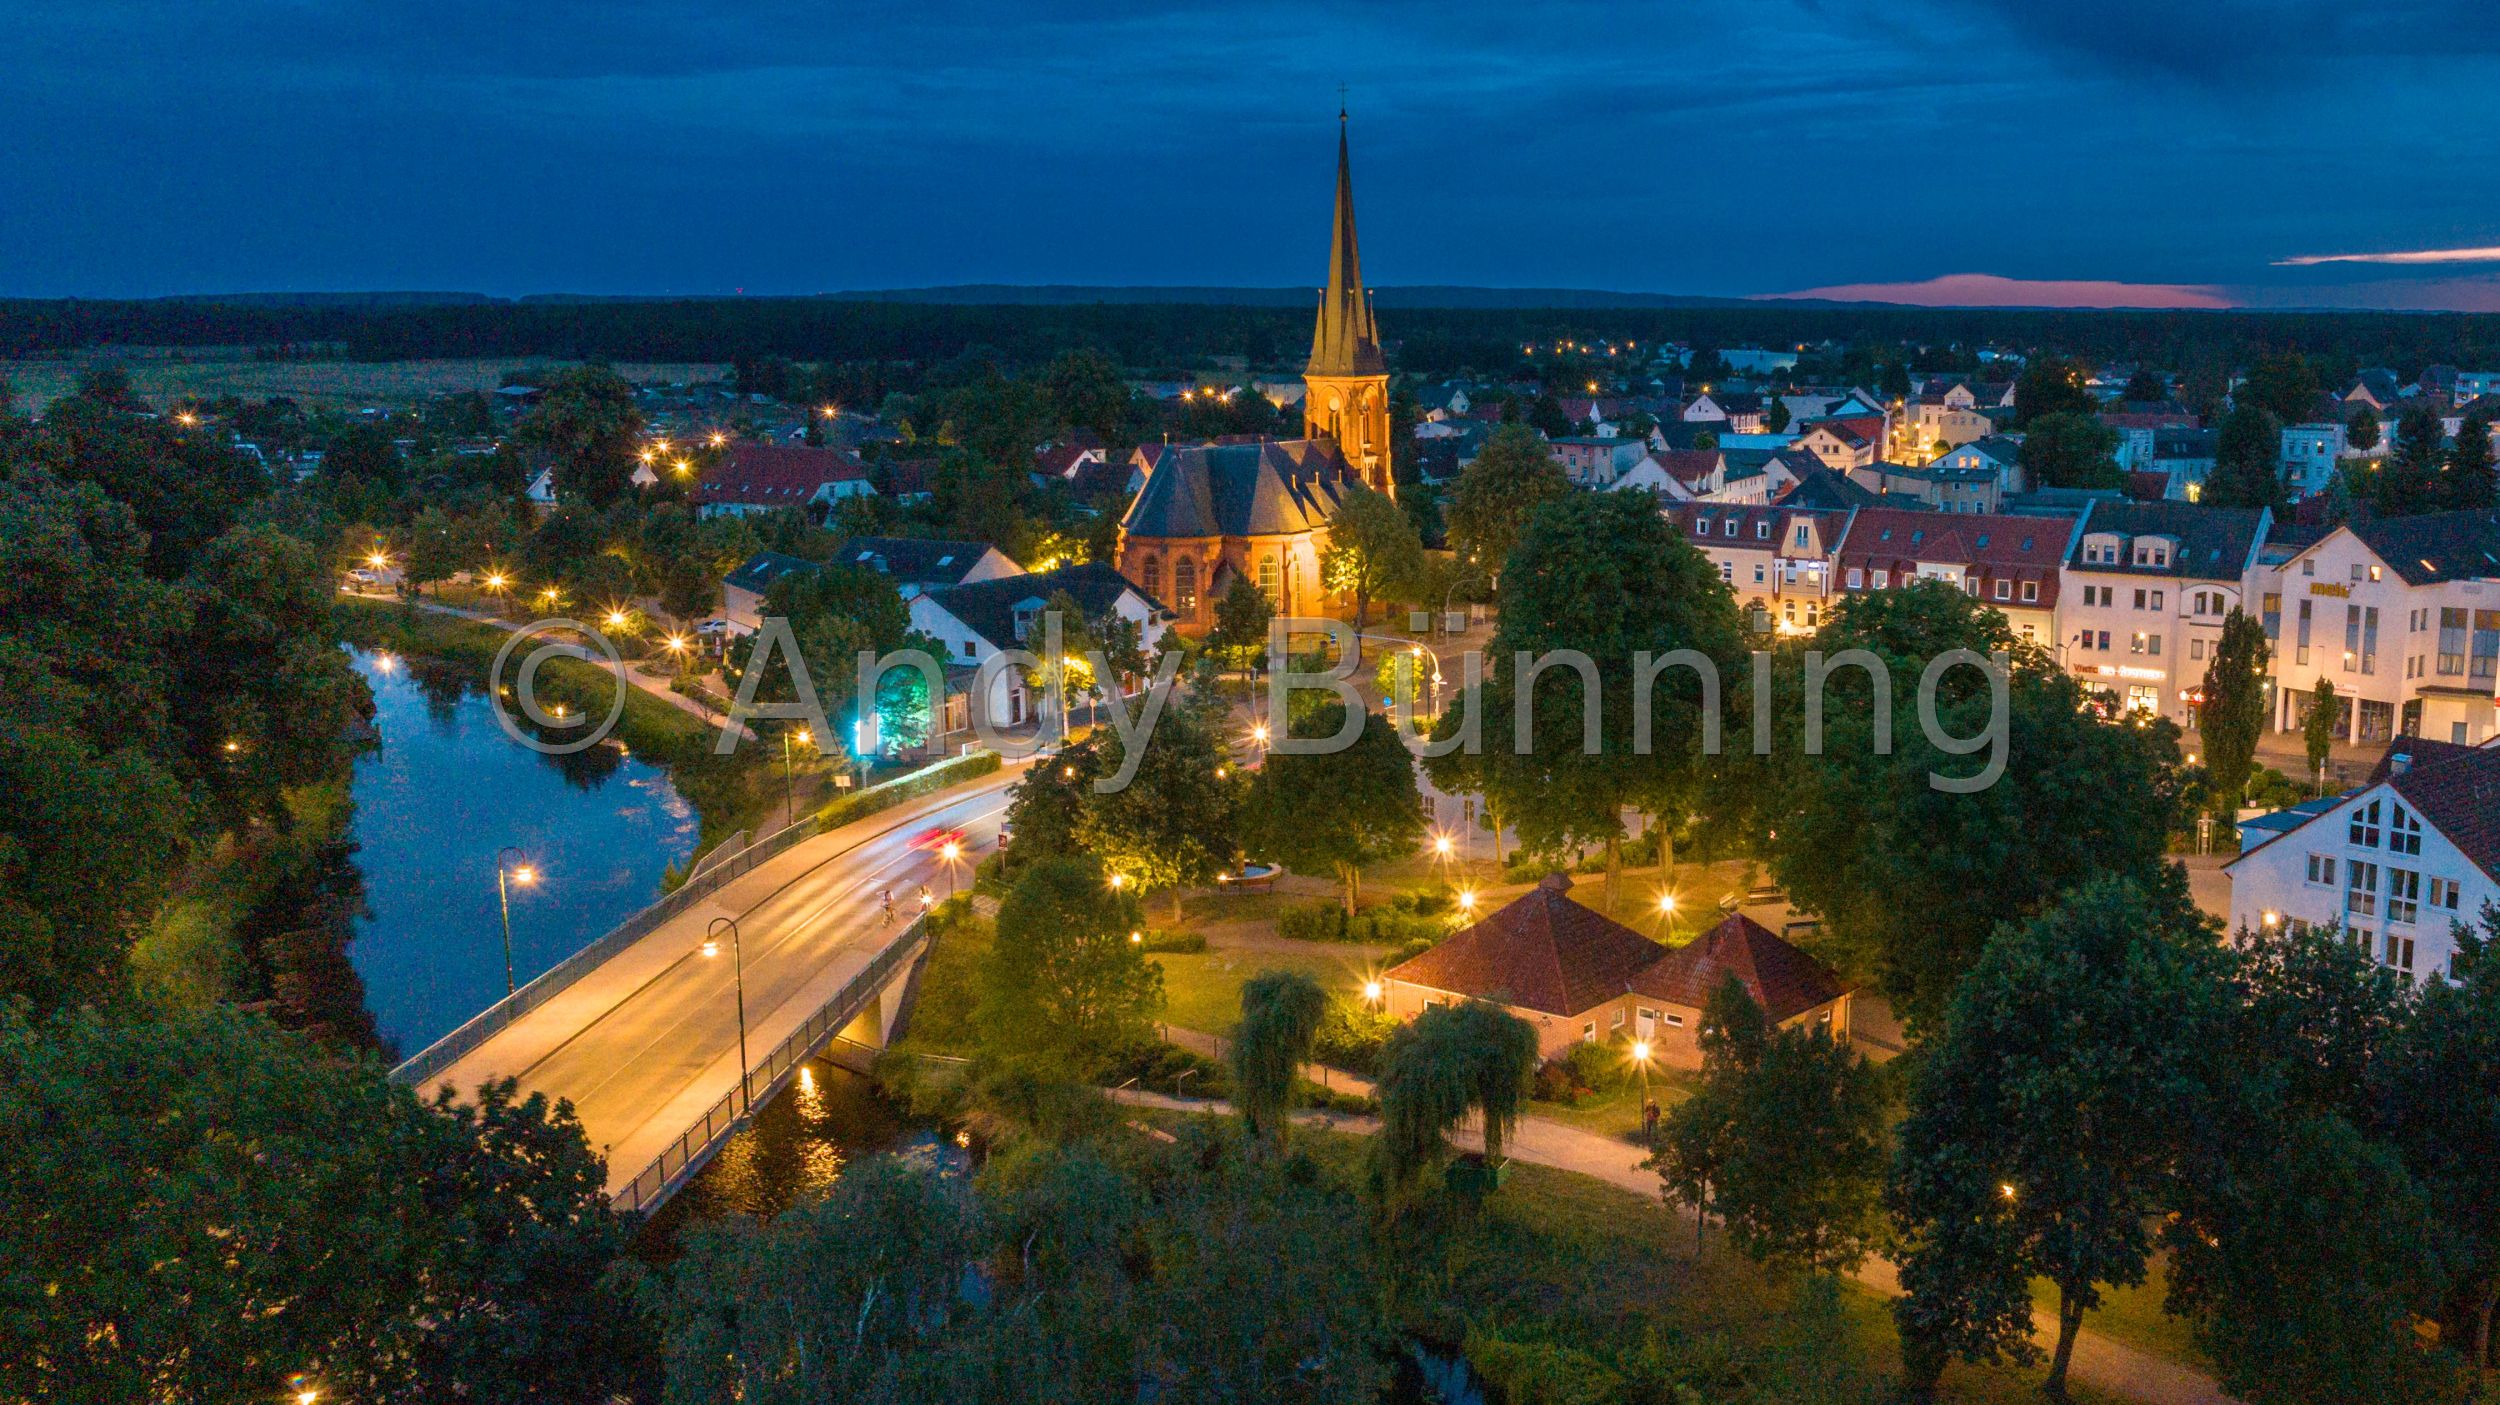 Preview ab230717_Torgelow-Abends_0010.jpg